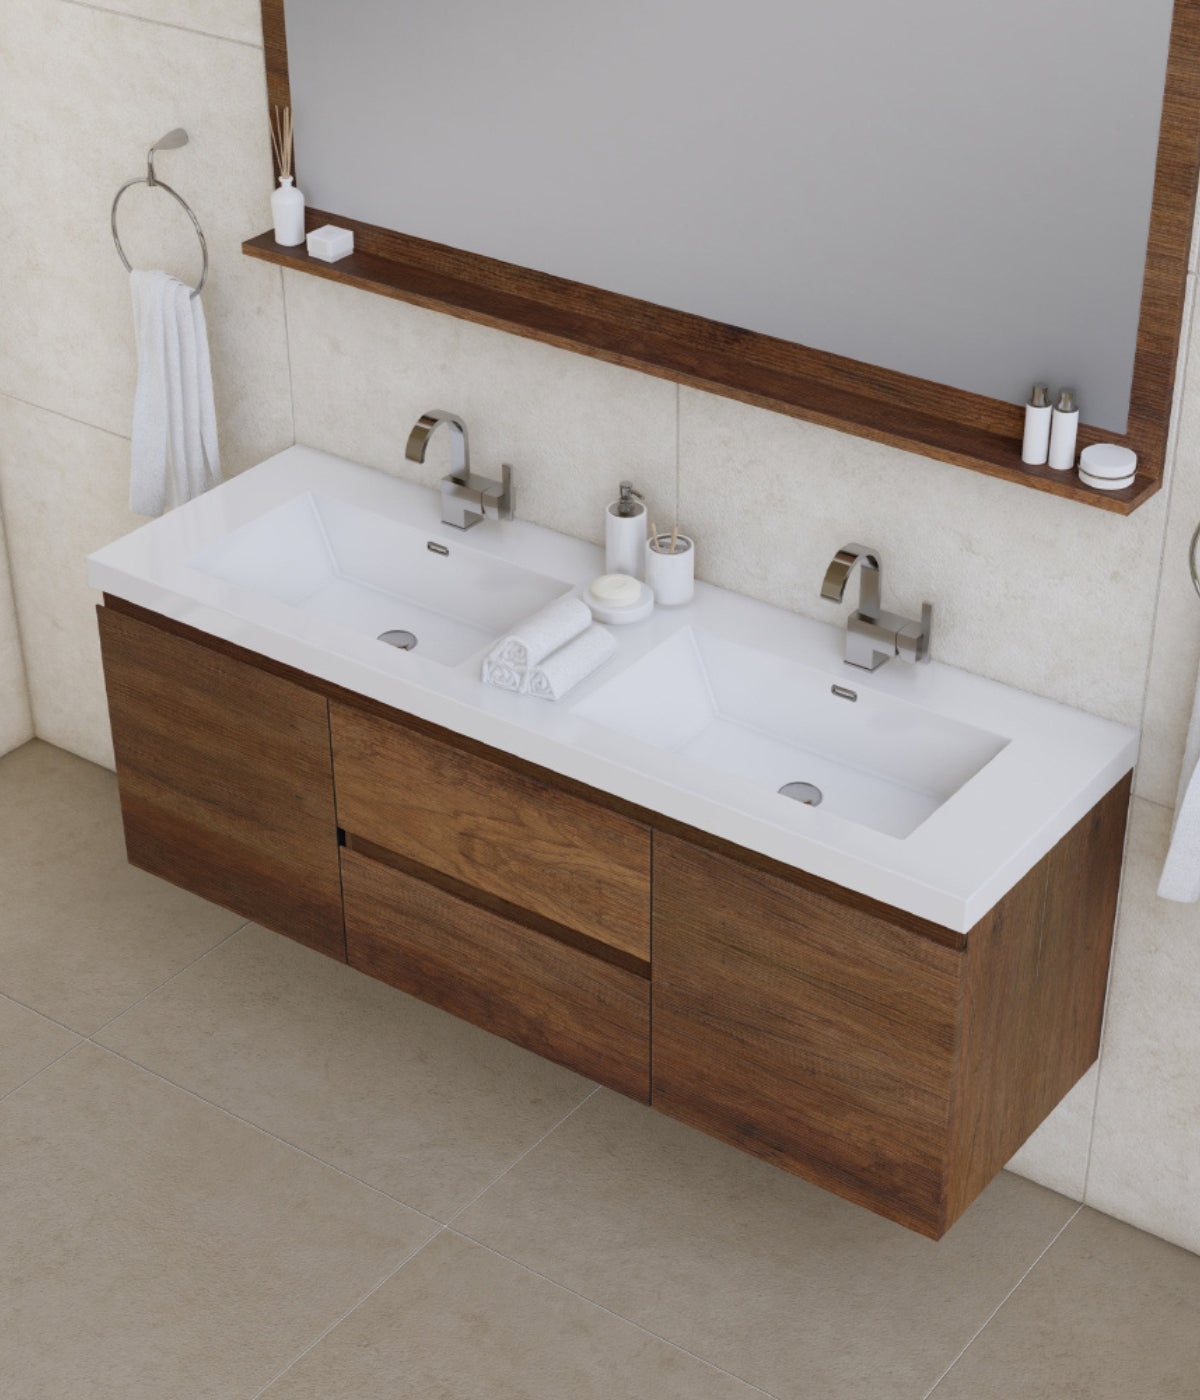 The best value, efficient bathroom wood vanity on the market.  This is the Paterno 60 inch by Alyth Bath